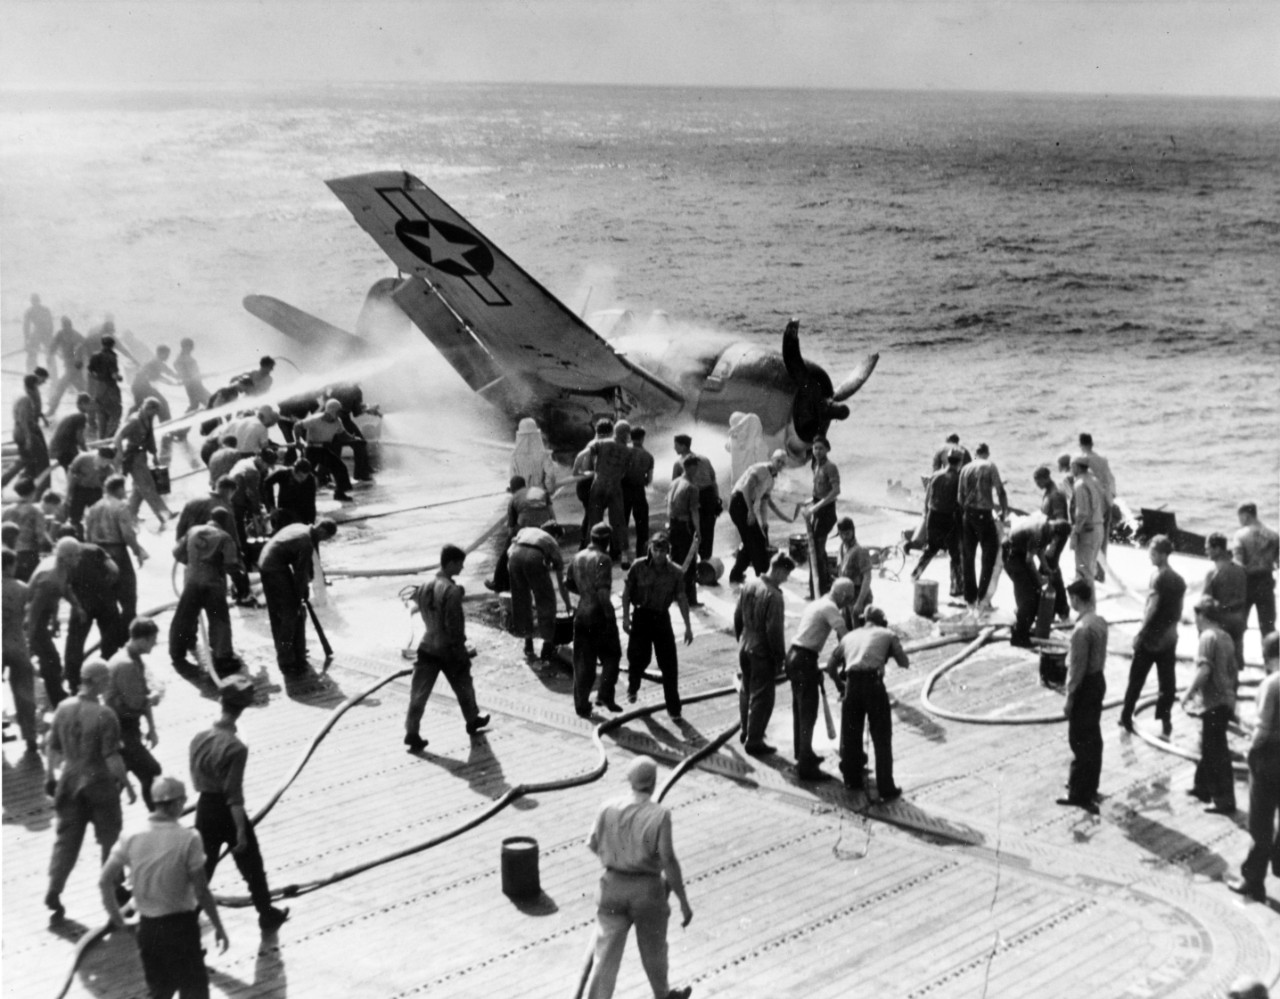 Flight deck crewmen extinguish the plane’s blaze, 10 November 1943. Johnson escapes without serious injuries, but sailors push the damaged Hellcat over the side and the ship continues toward the Gilberts. (U.S. Navy Photograph 80-G-205474, National Archives and Records Administration, Still Pictures Branch, College Park, Md.)